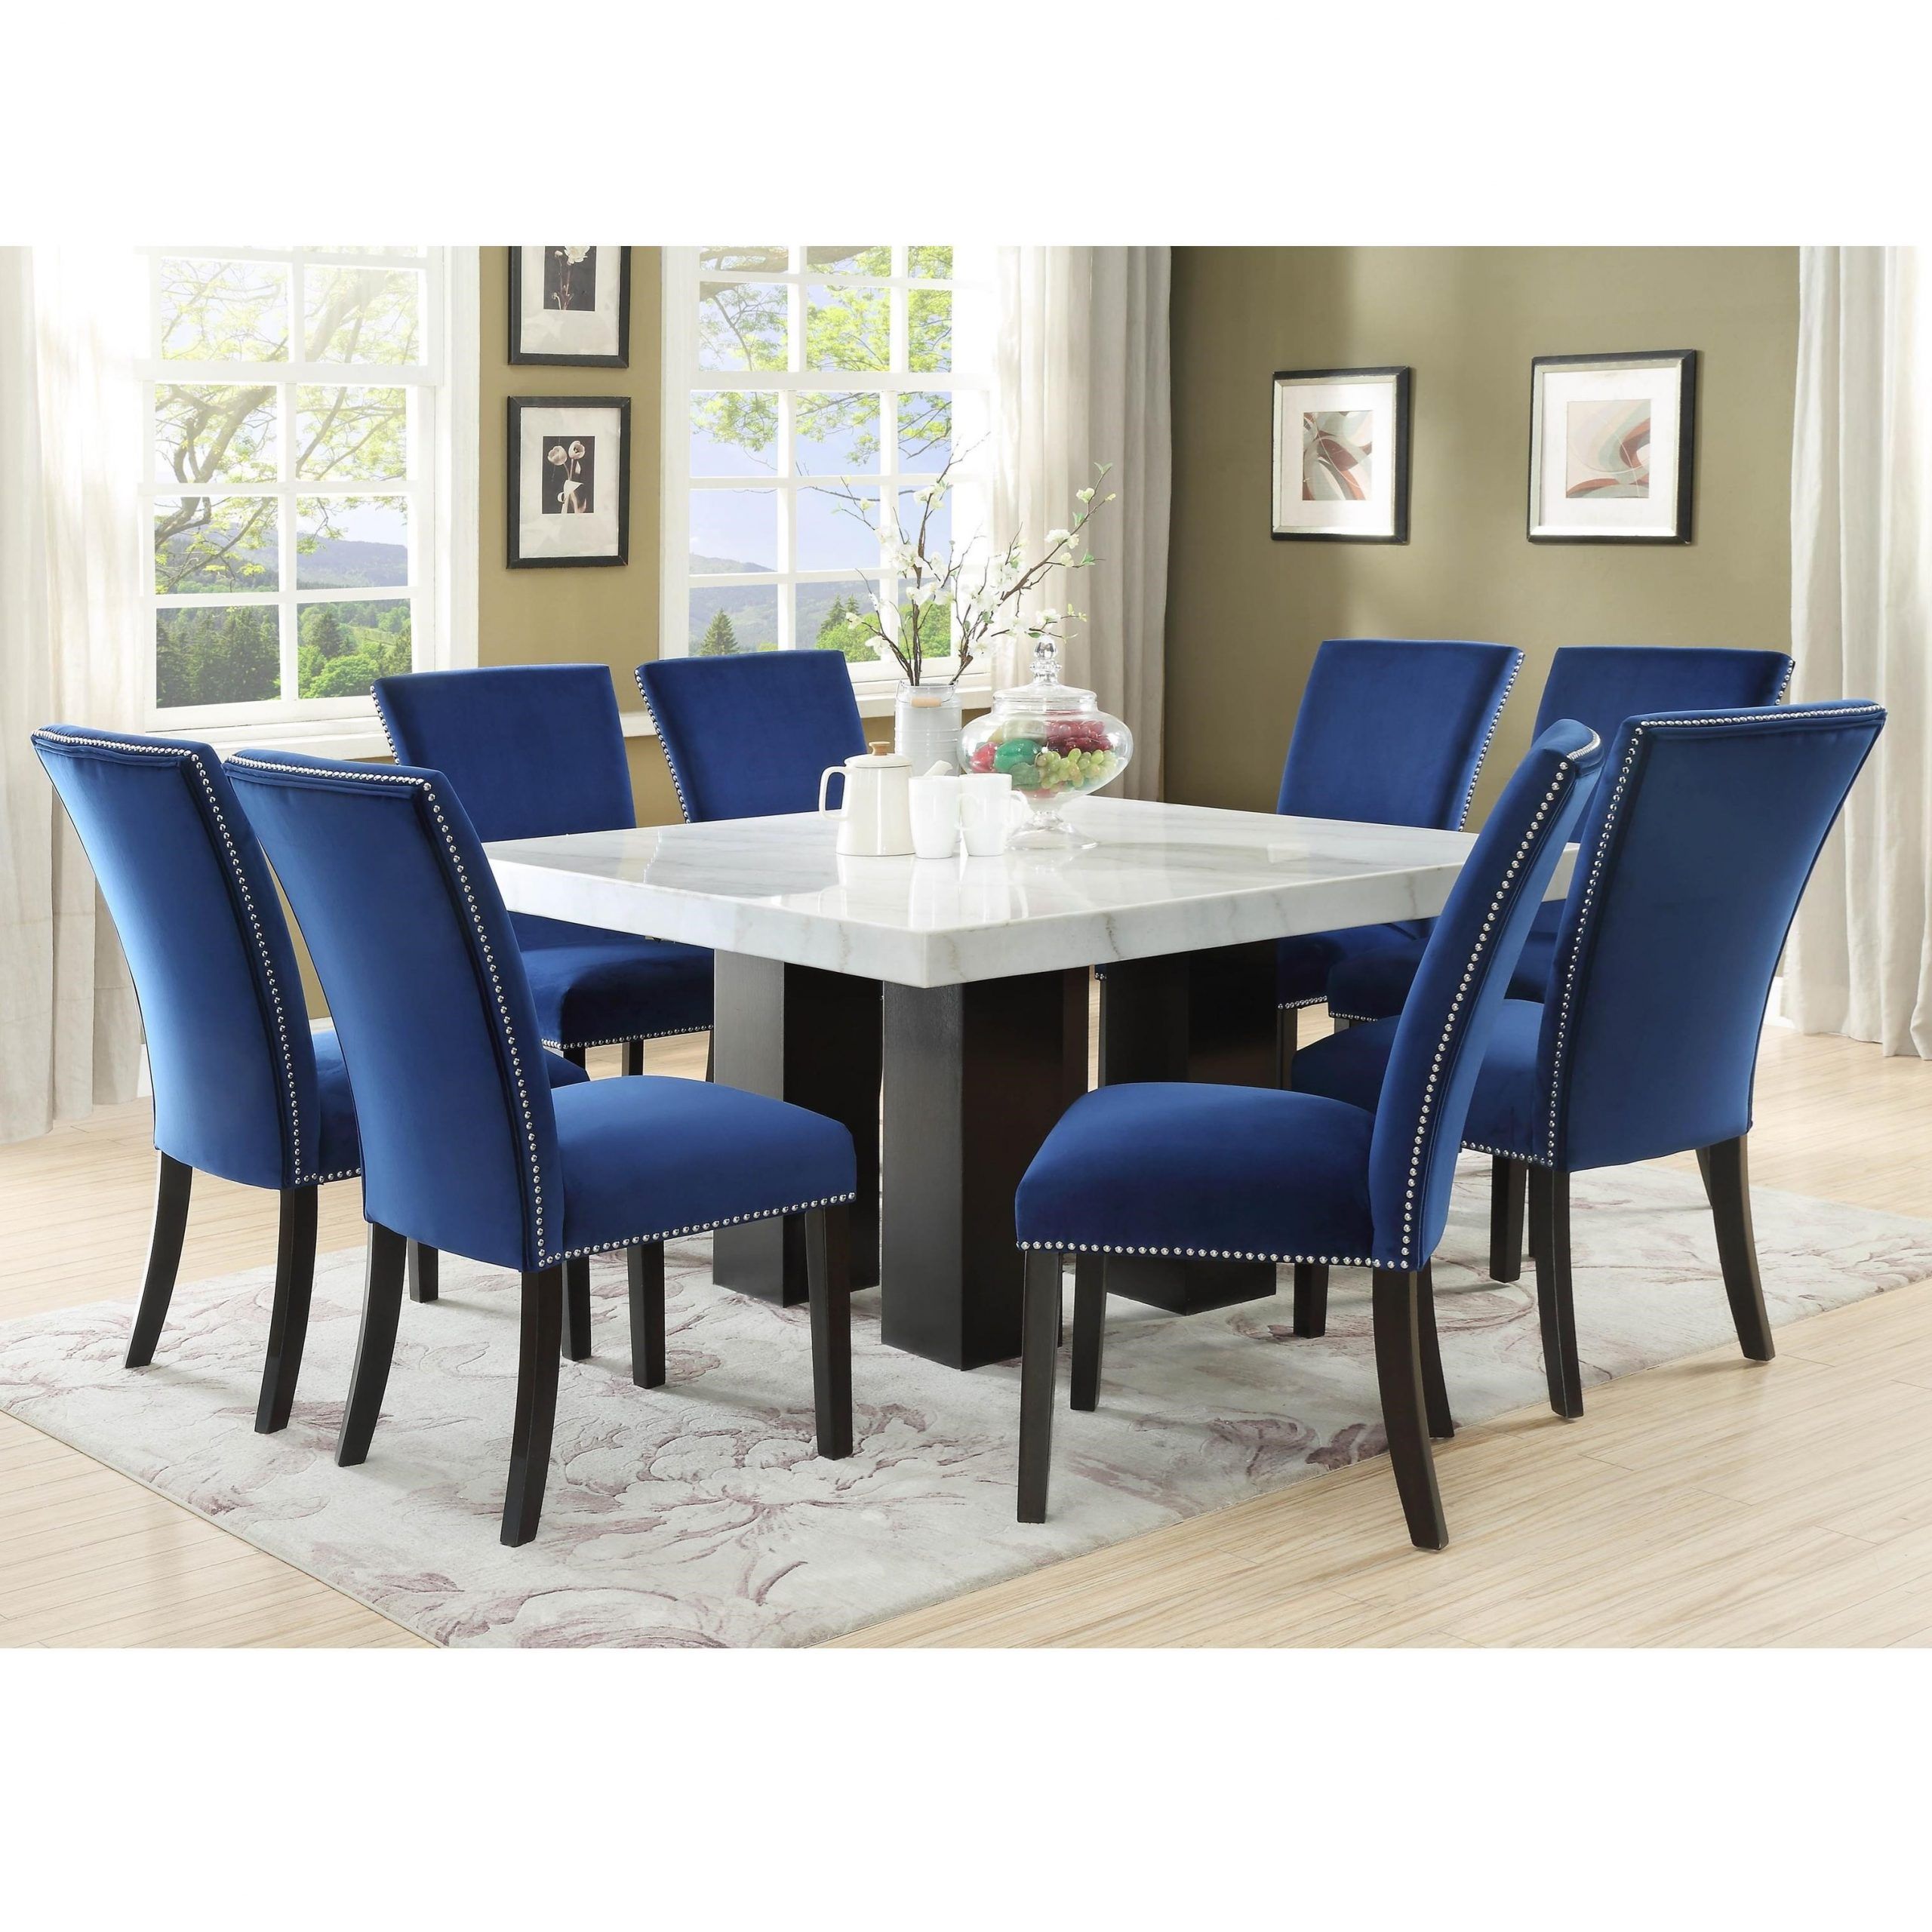 Steve Silver Camila 9 Piece Dining Set With Marble Table Top | Standard With Regard To 9 Piece Oval Dining Sets (View 10 of 15)